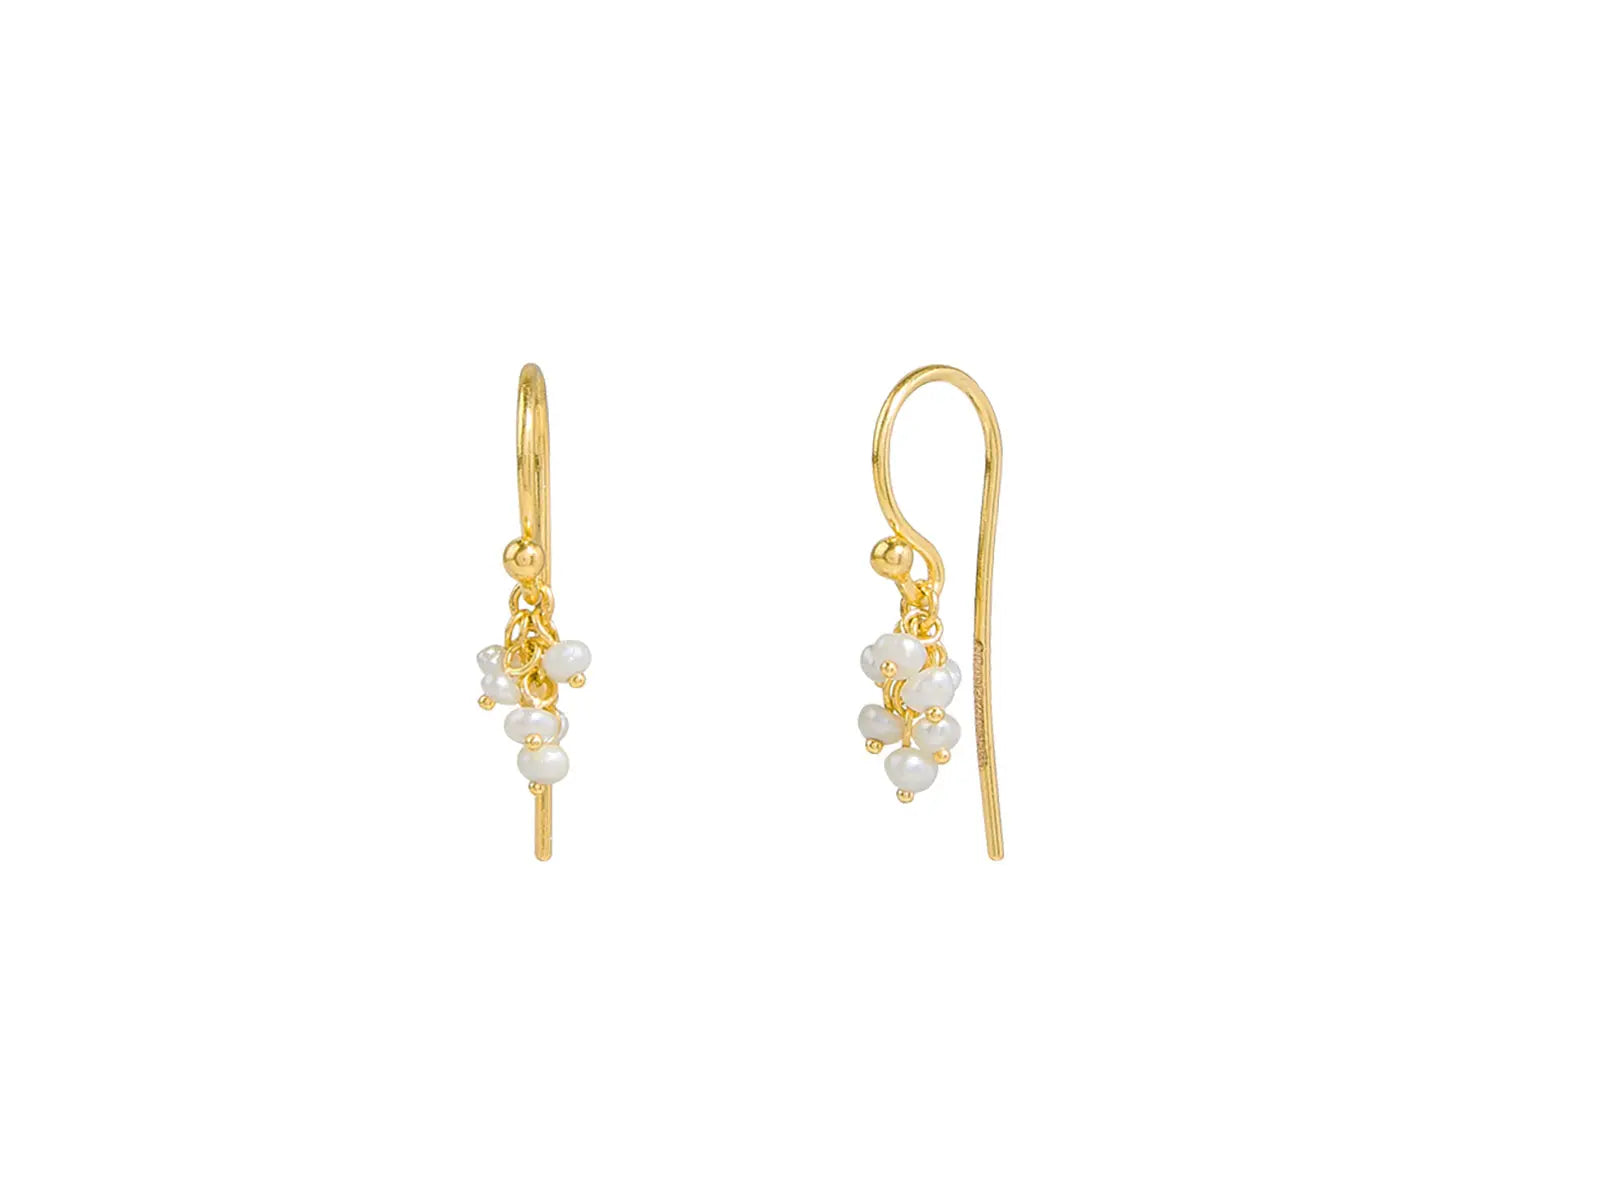 Charm Earrings in 24k/18k Yellow Gold, Small Stone Cluster, from the Boucle Collection, with Pearl  Length: 0.80 inches  24k/18k Yellow Gold  Boucle Collection Drop Earrings Primary Stone: Pearl/seed Lovingly handcrafted in our workshop in Istanbul by artisans personally trained by Gurhan